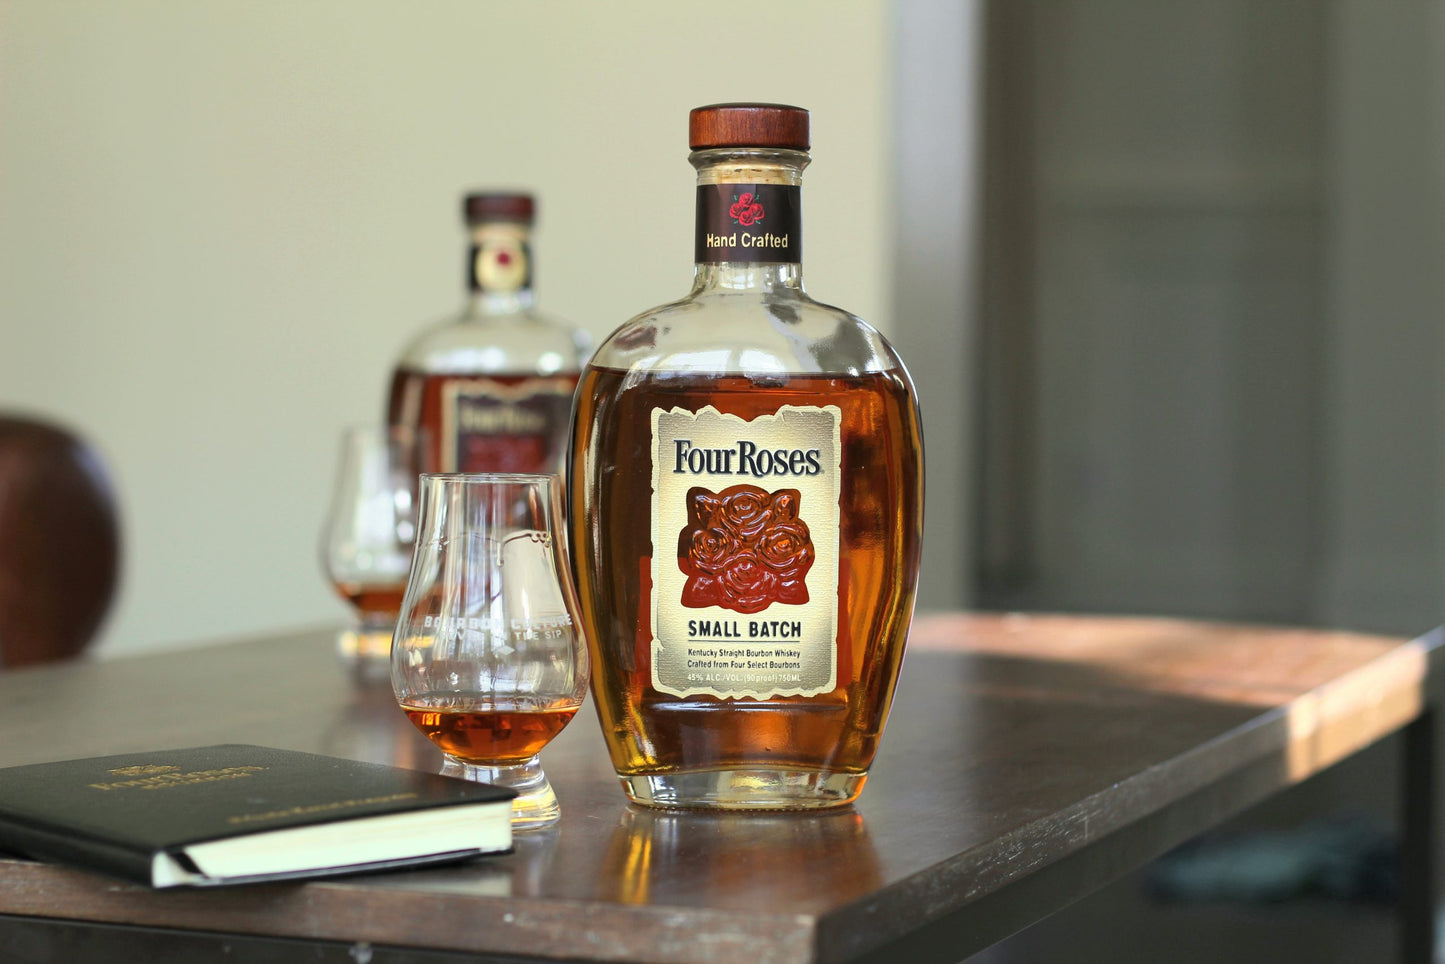 Four Roses Small Batch Bourbon Whiskey (70cl, 45%)